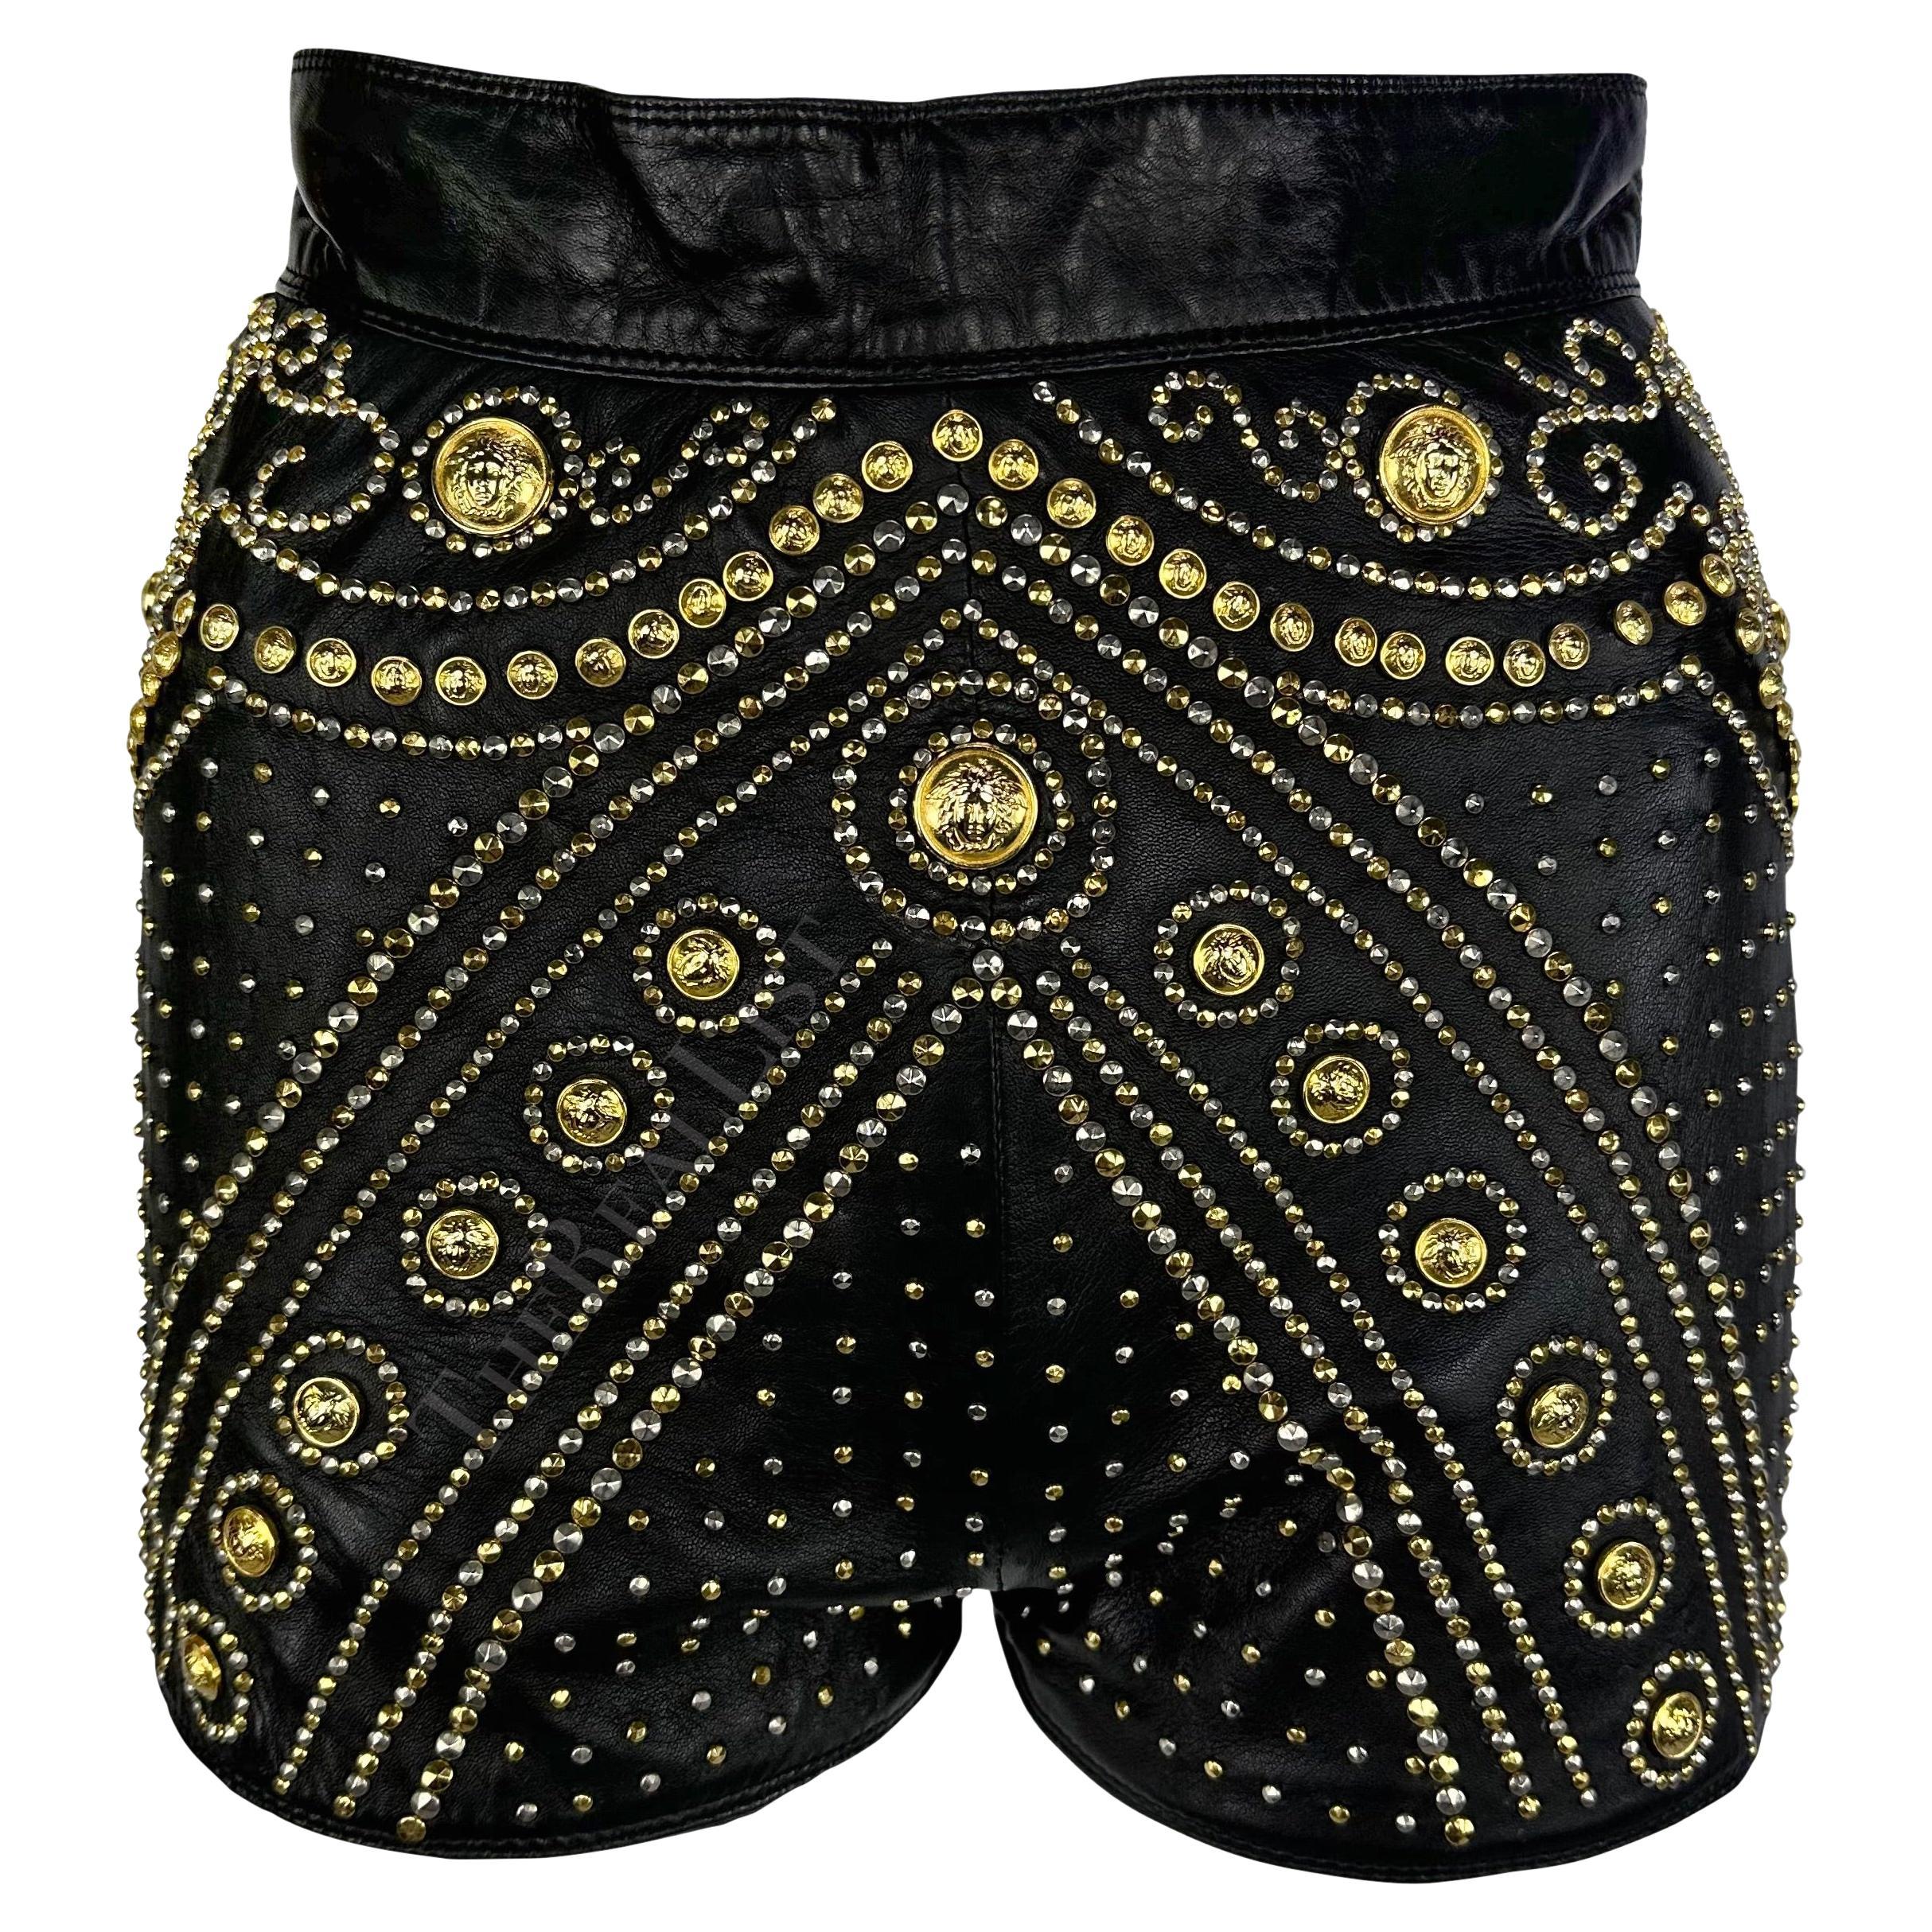 F/W 1992 Atelier Versace Haute Couture Runway Medusa Studded Leather Shorts For Sale